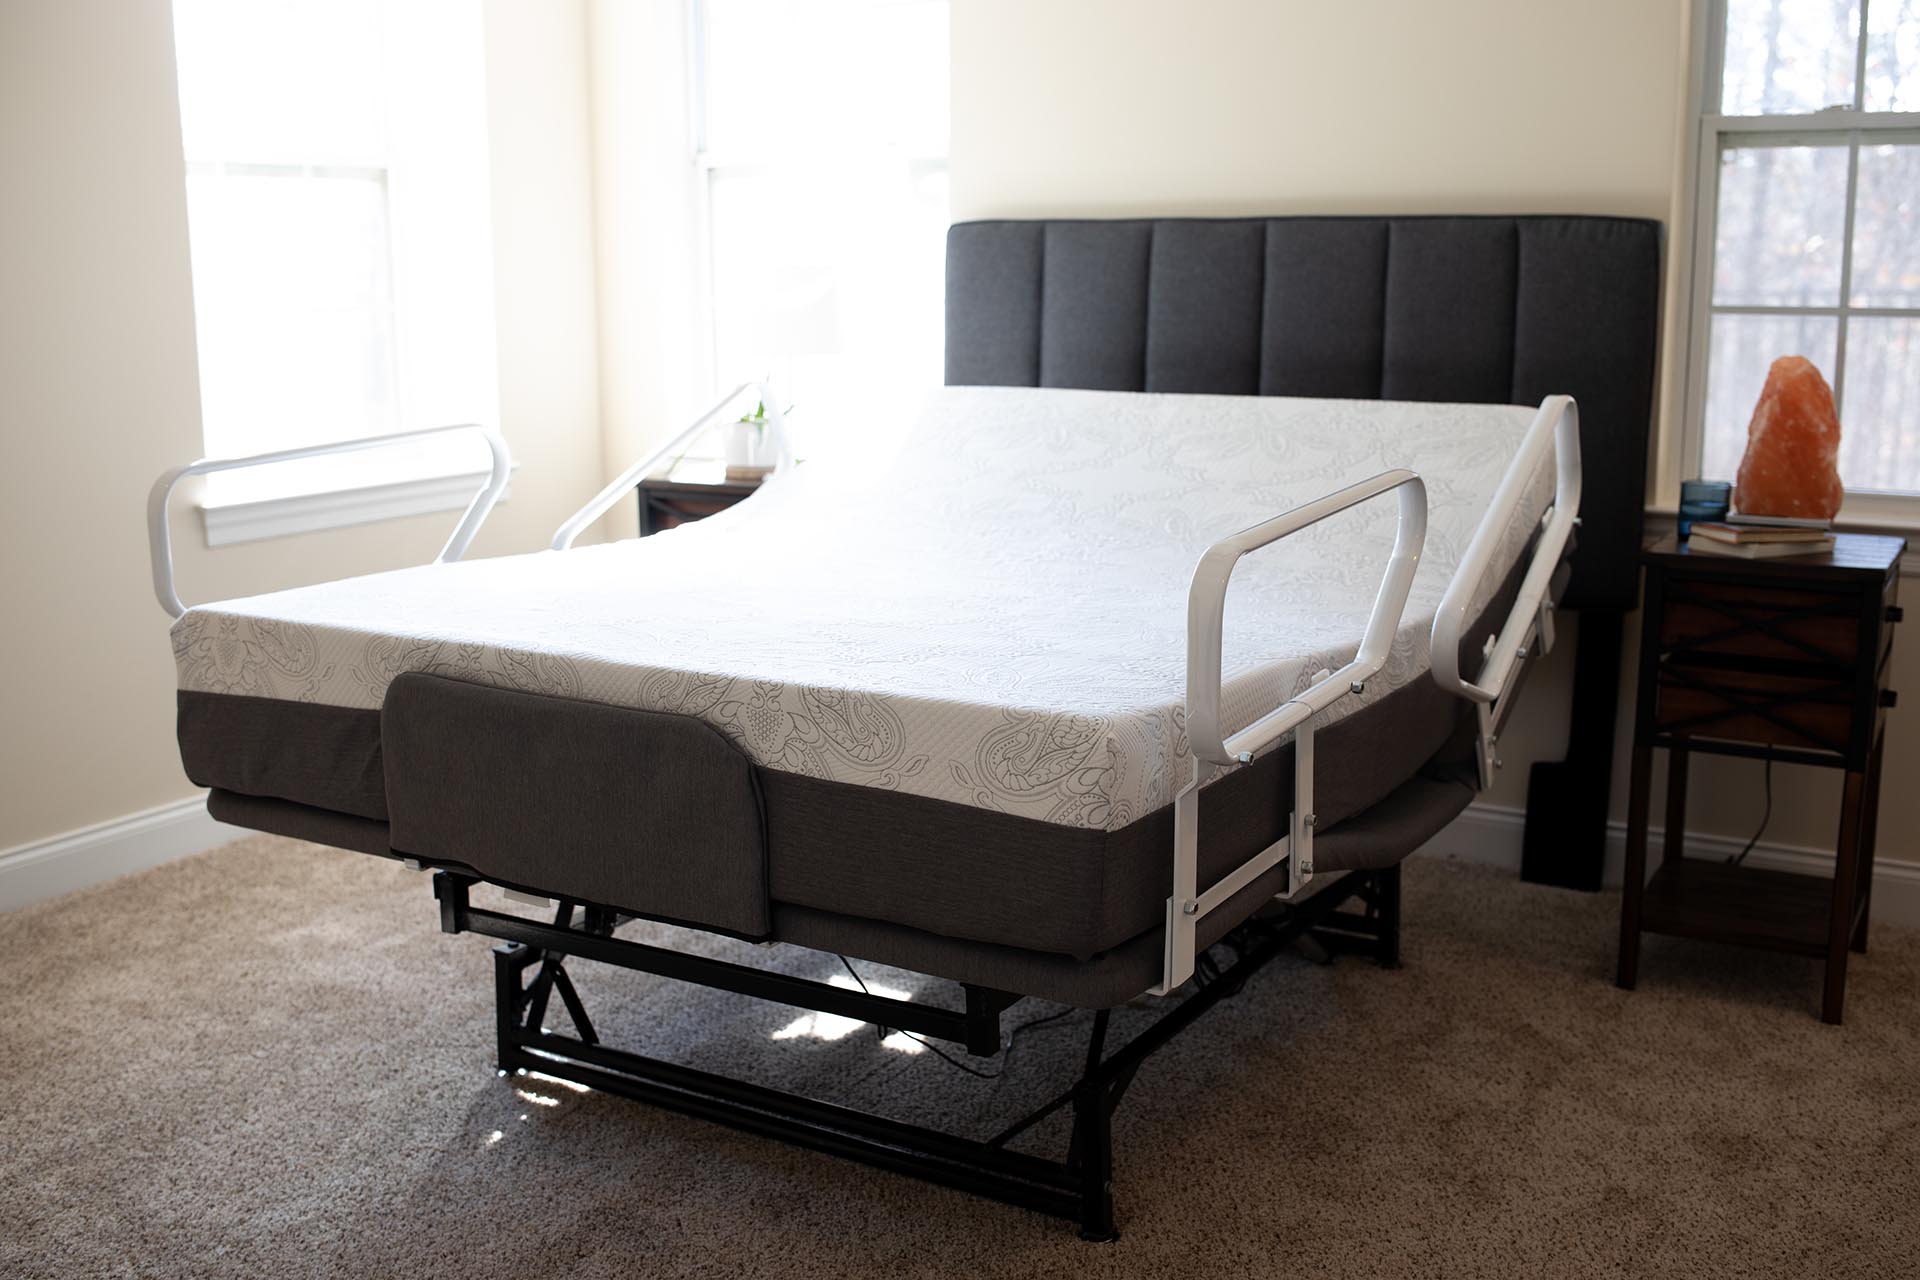 flexabed Phoenix 3 motor high low fully electric hospital bed